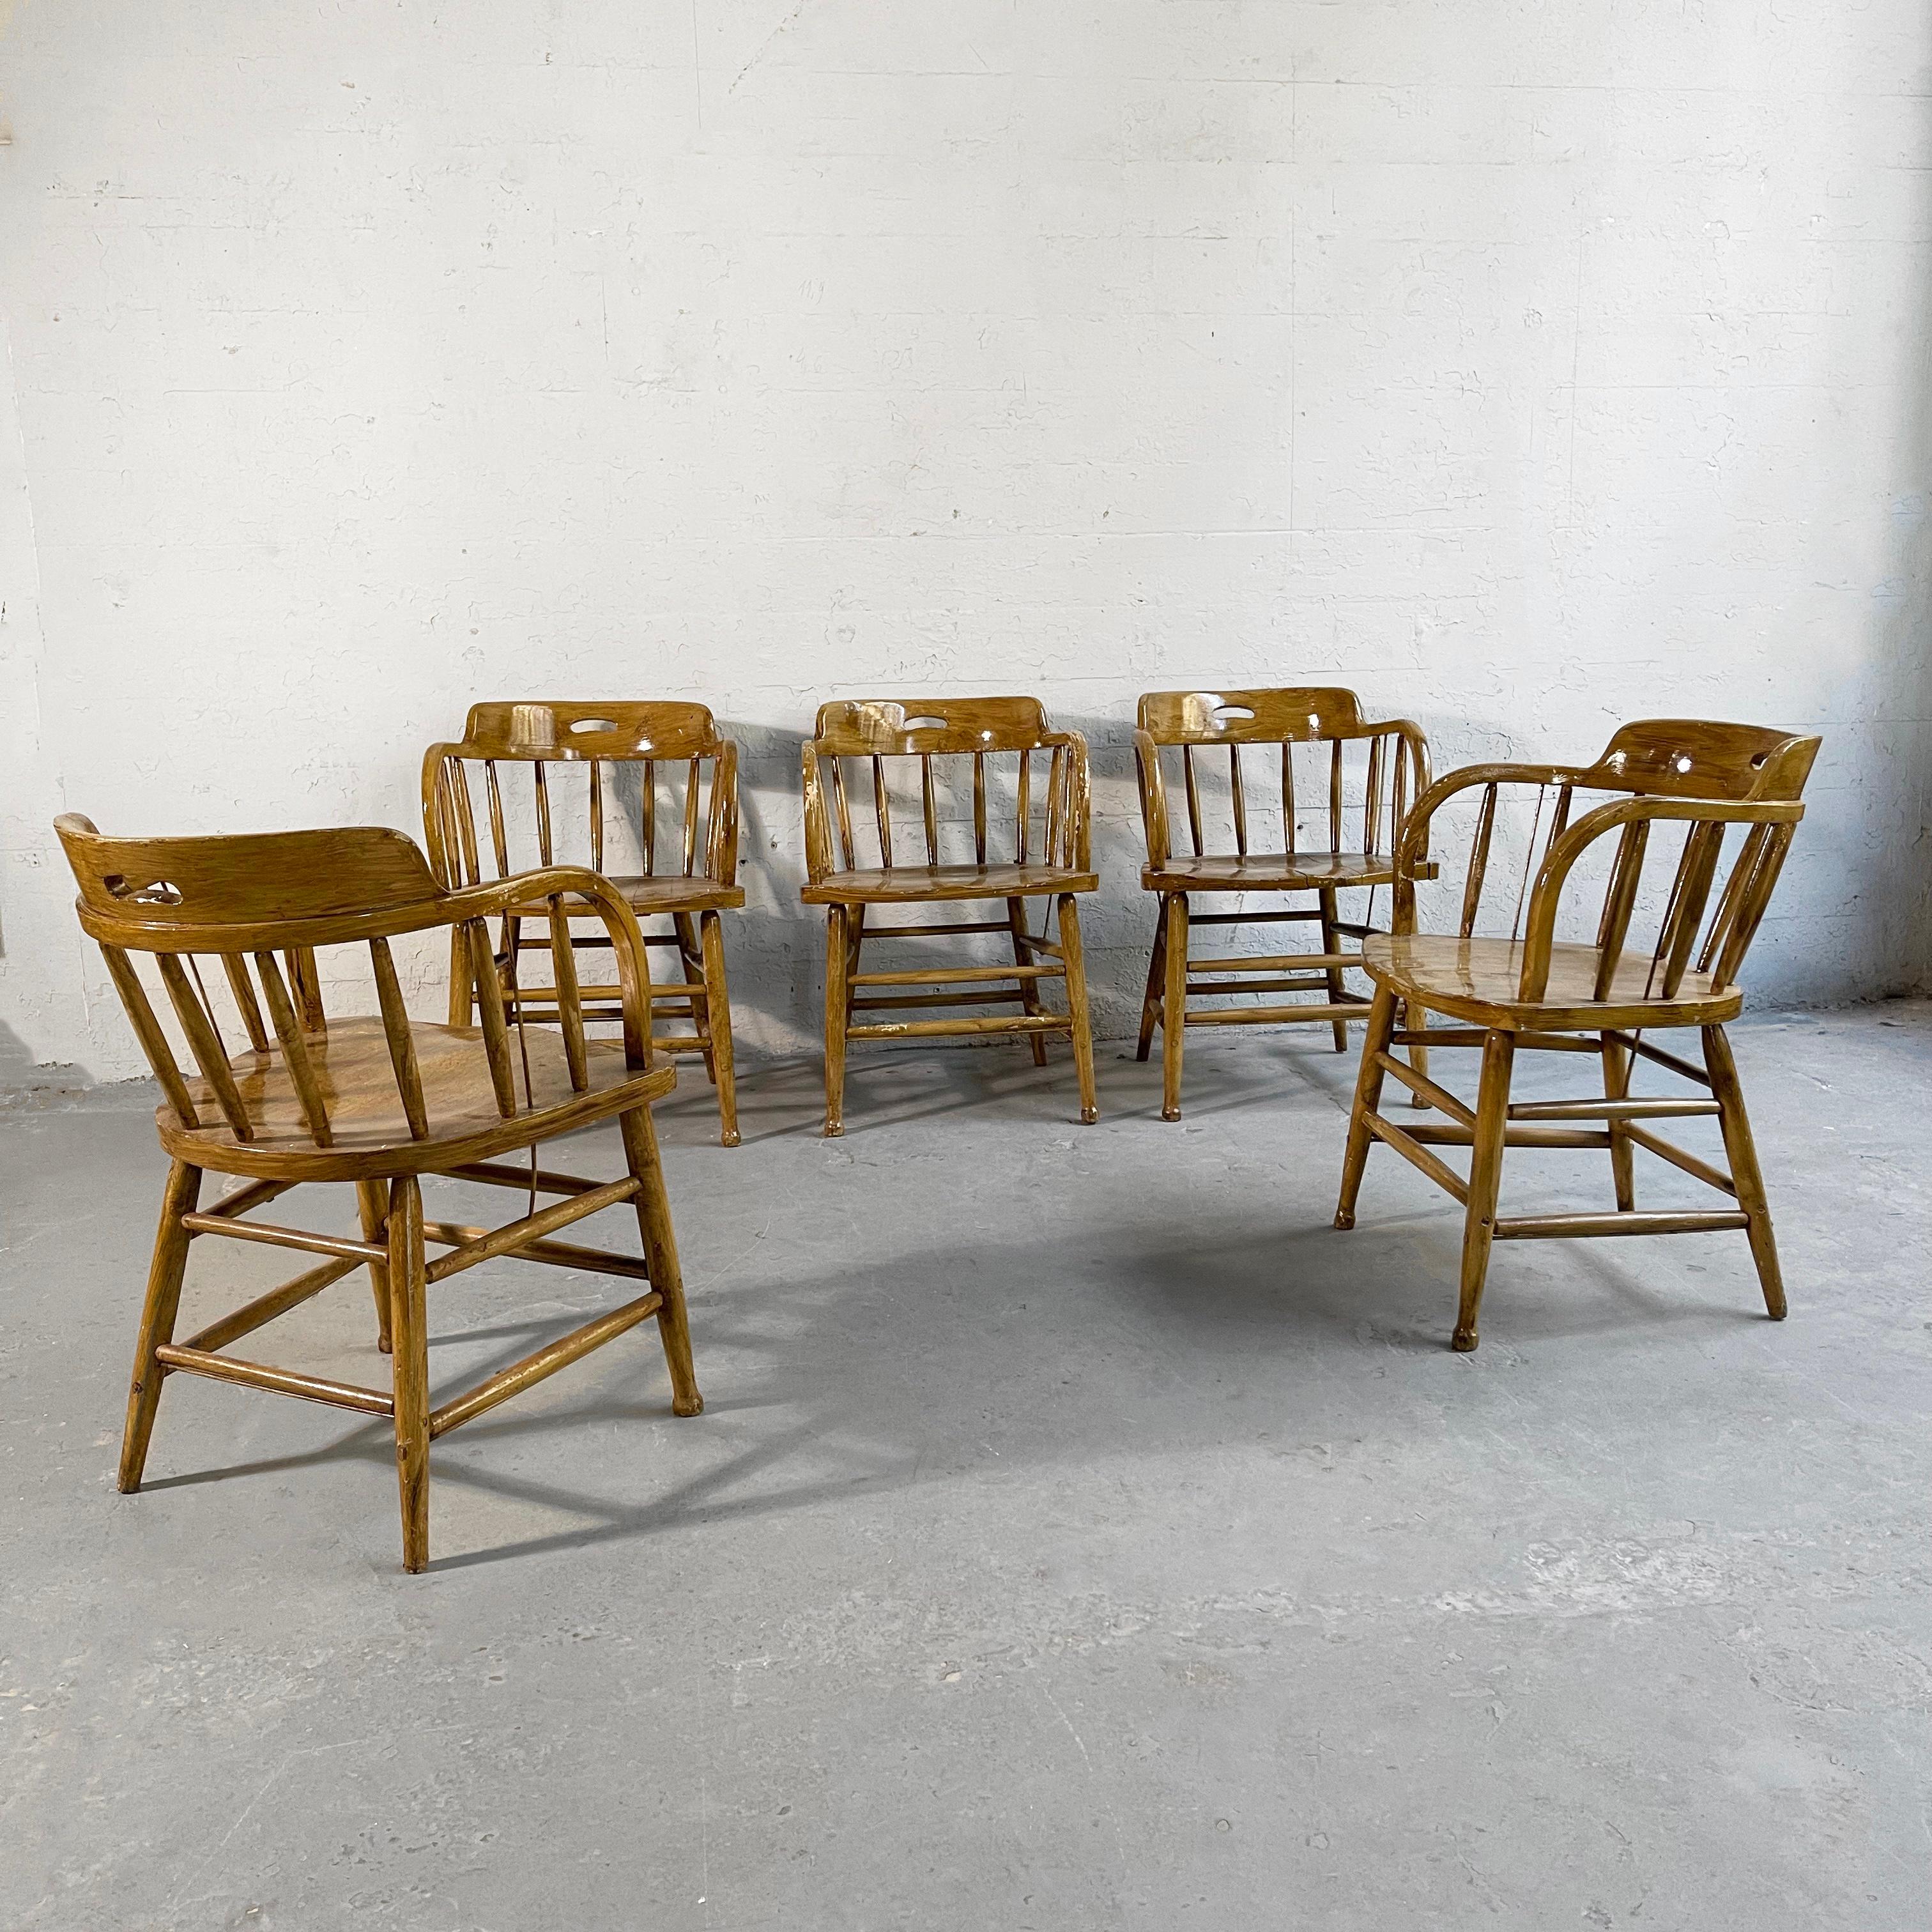 American Craftsman Early 20th Century, Rustic Oak Firehouse Dining Chairs For Sale